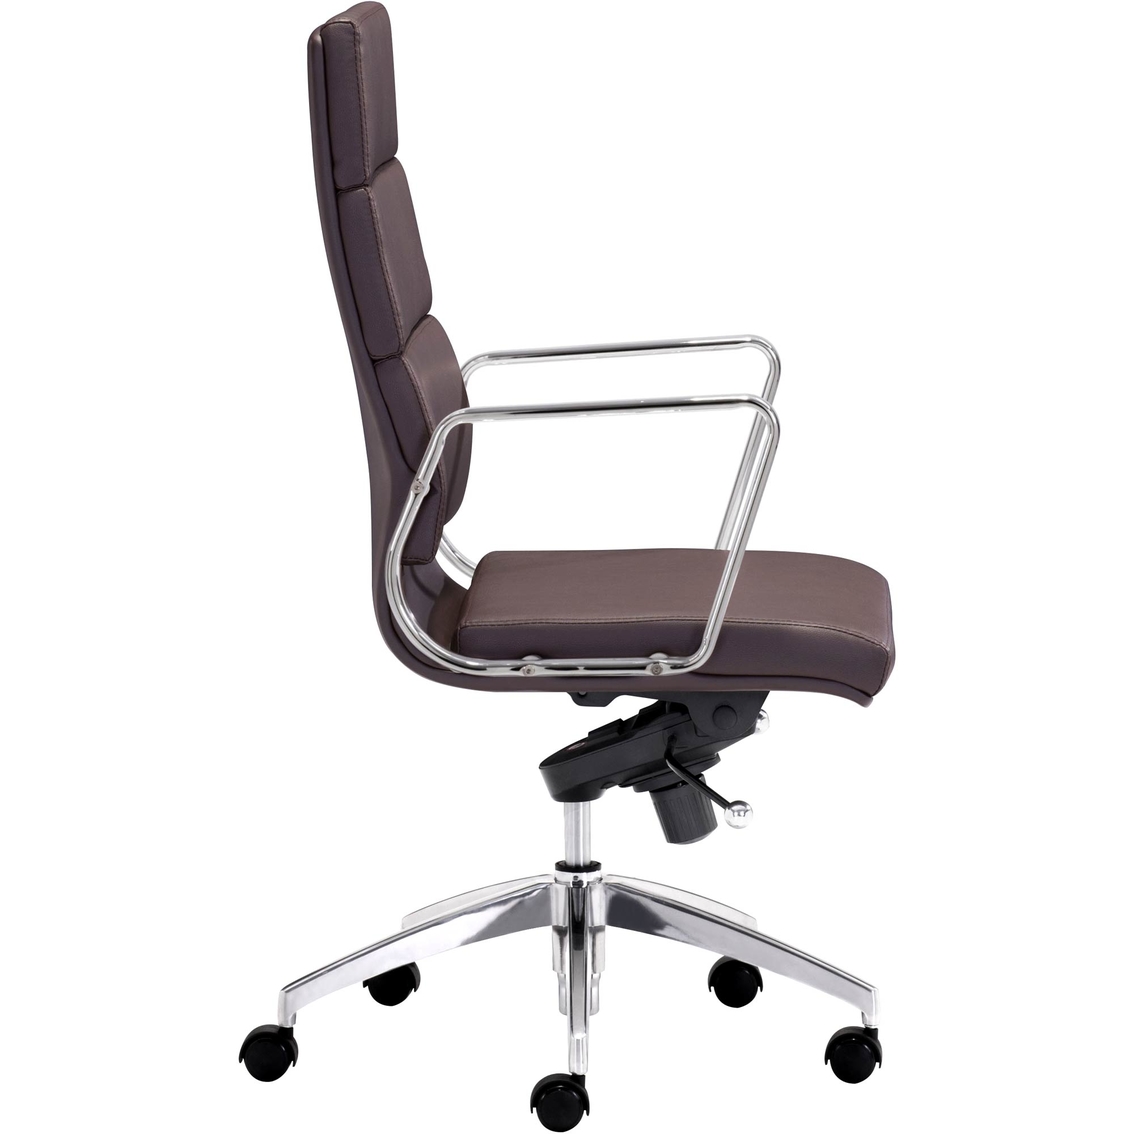 Zuo Modern Engineer High Back Office Chair - Image 3 of 4